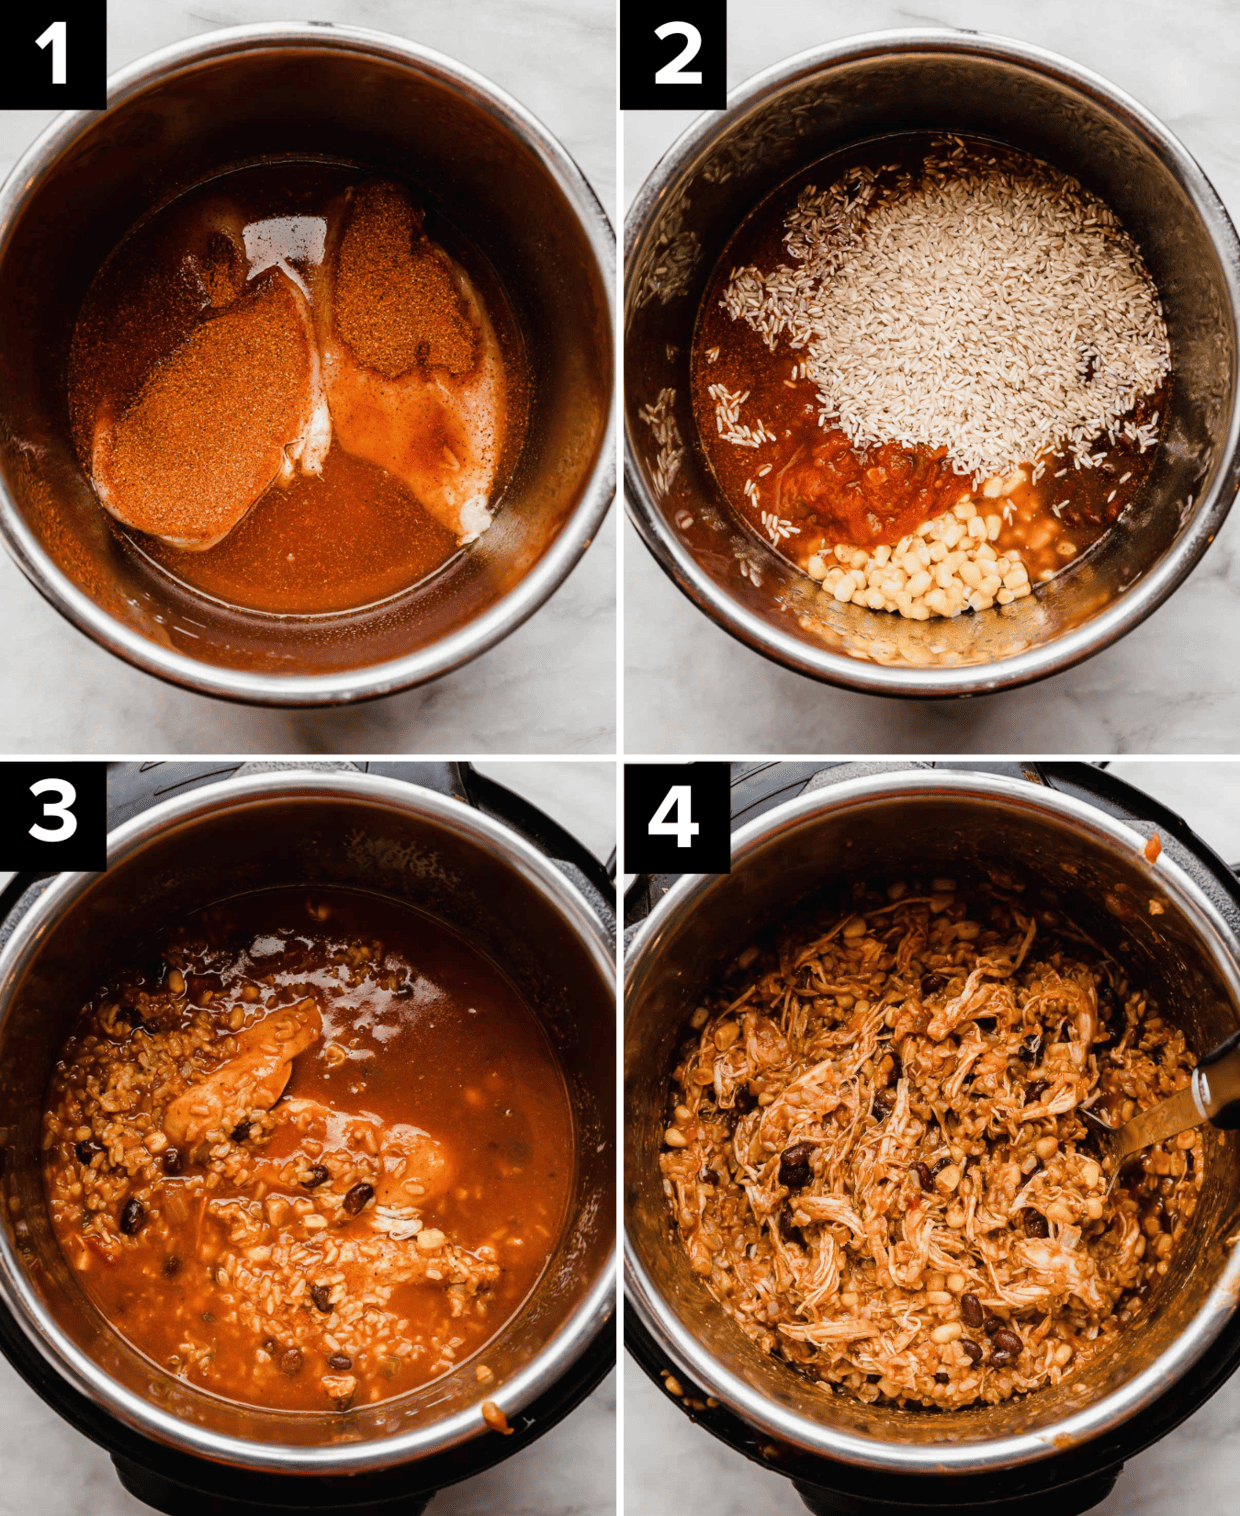 Four images showing an instant pot with chicken, and rice, beans, and other ingredients for making Instant Pot Chicken Taco Bowls, with ingredients added progressively.